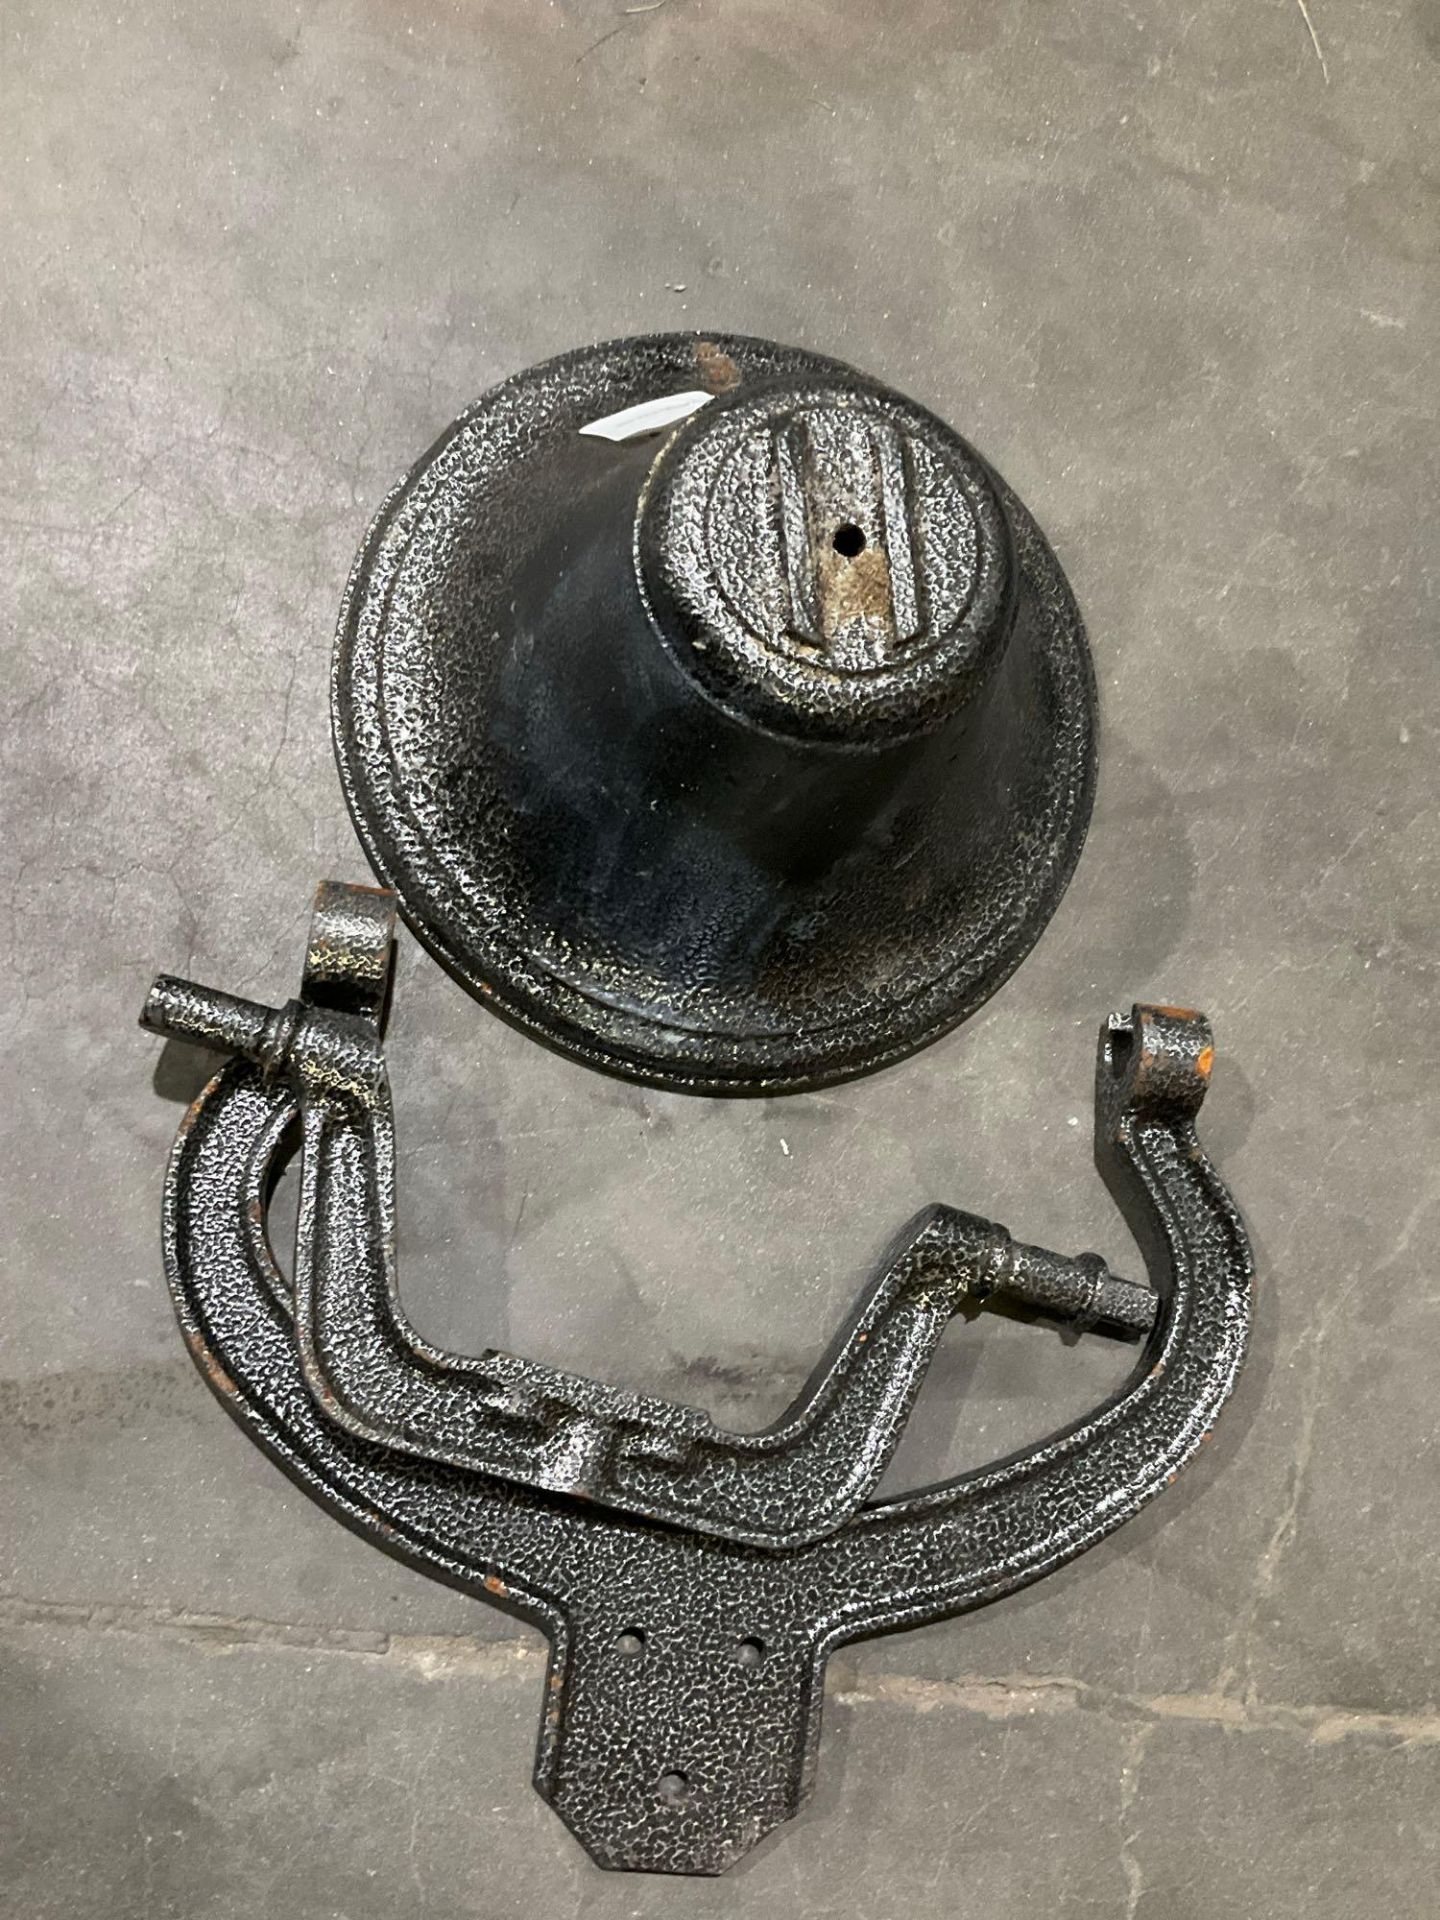 CAST IRON FREEDOM FARM BELL - Image 2 of 3